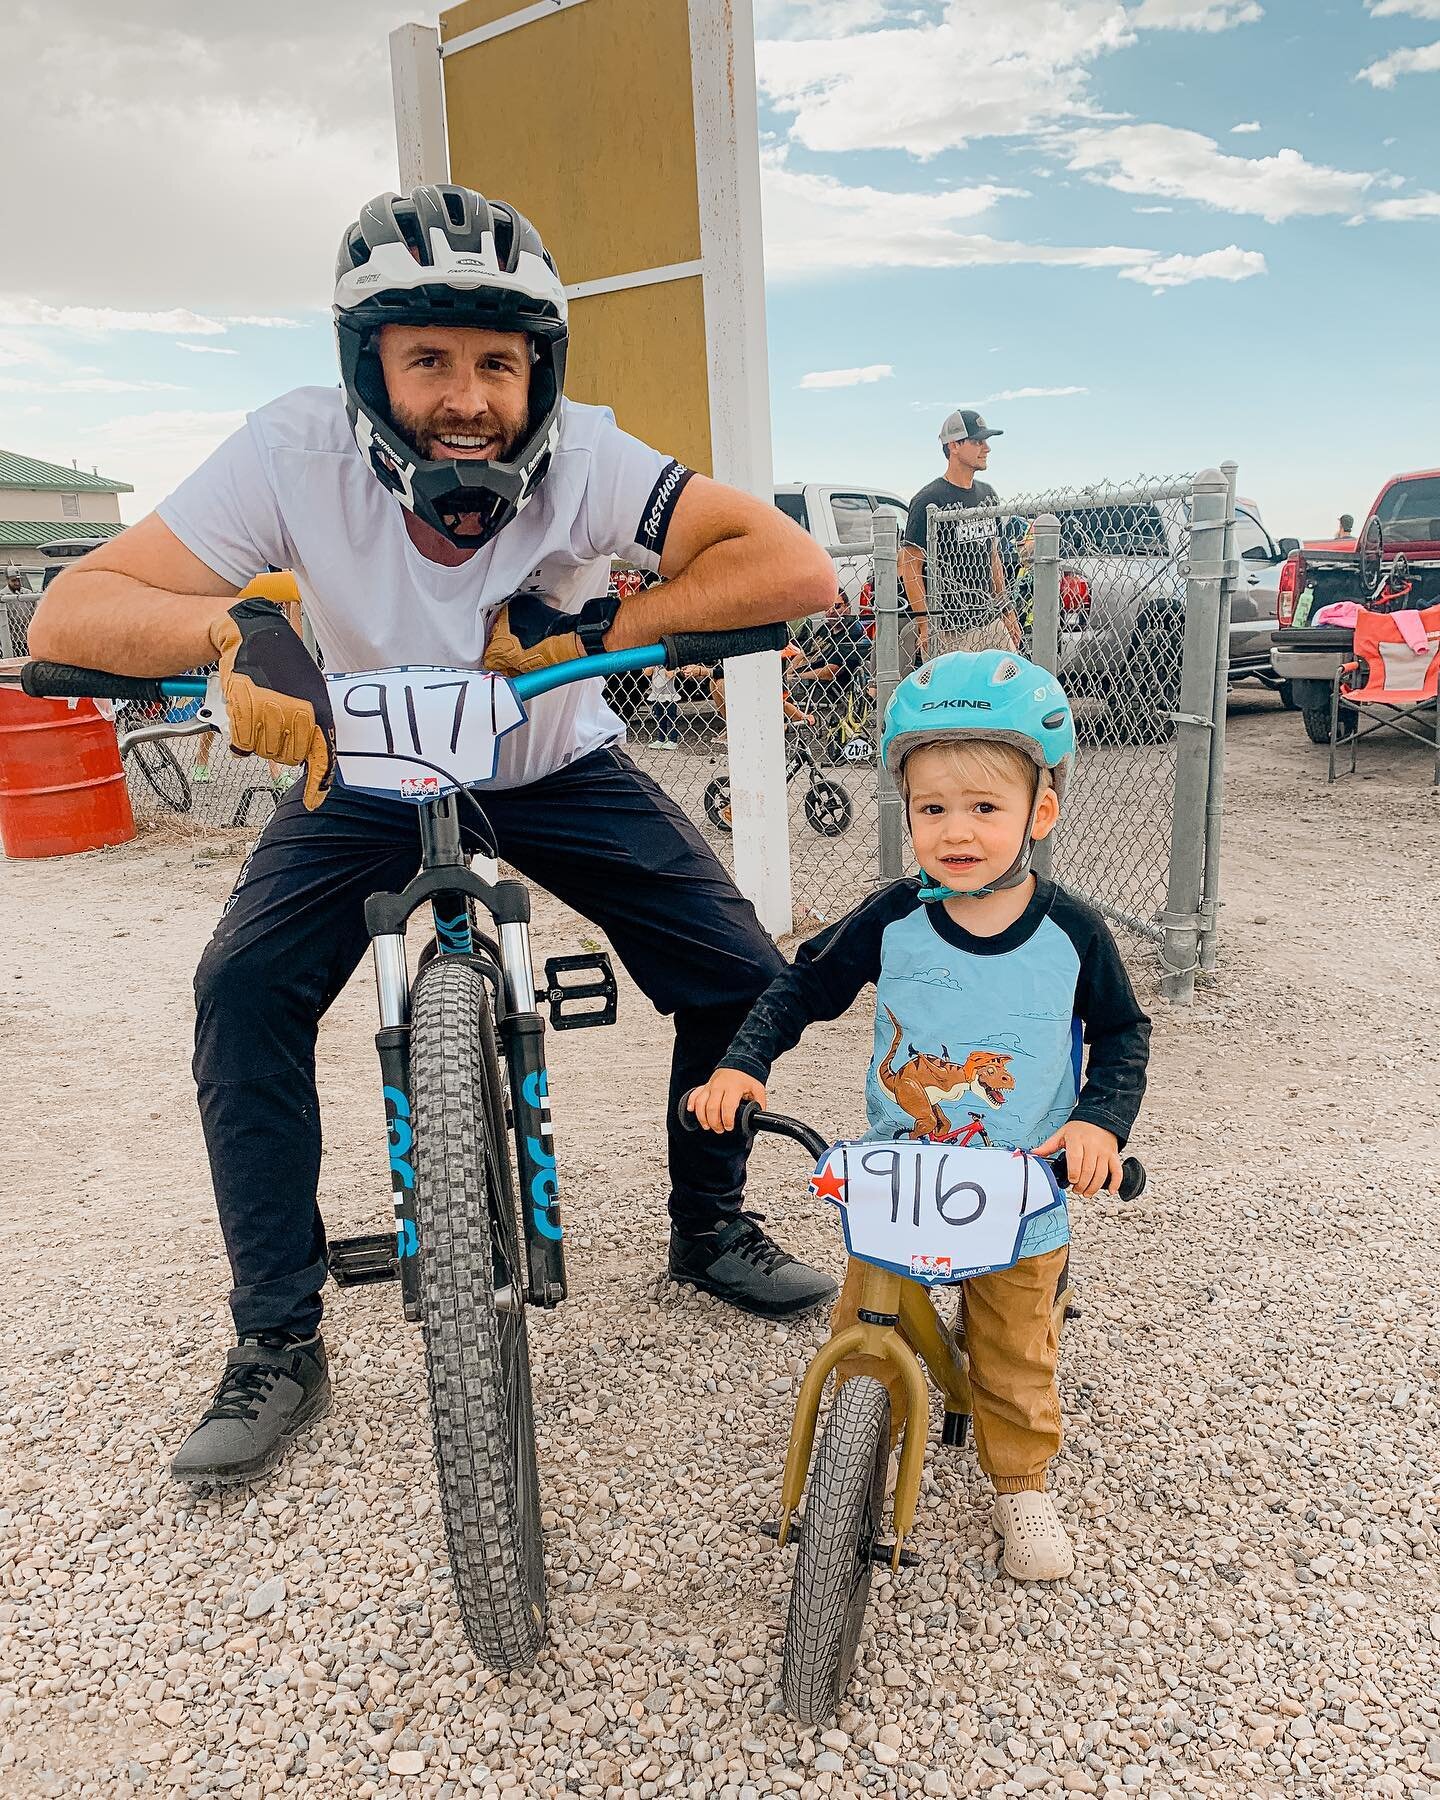 Little Eddie and I raced our bikes together at @deseretpeakbmx for the first time and had an absolute hoot!

Eddie entered the &lsquo;Strider Moto&rsquo; class for little kids, and I hesitantly agreed to race in the &lsquo;MTB Moto&rsquo; class.

Edd